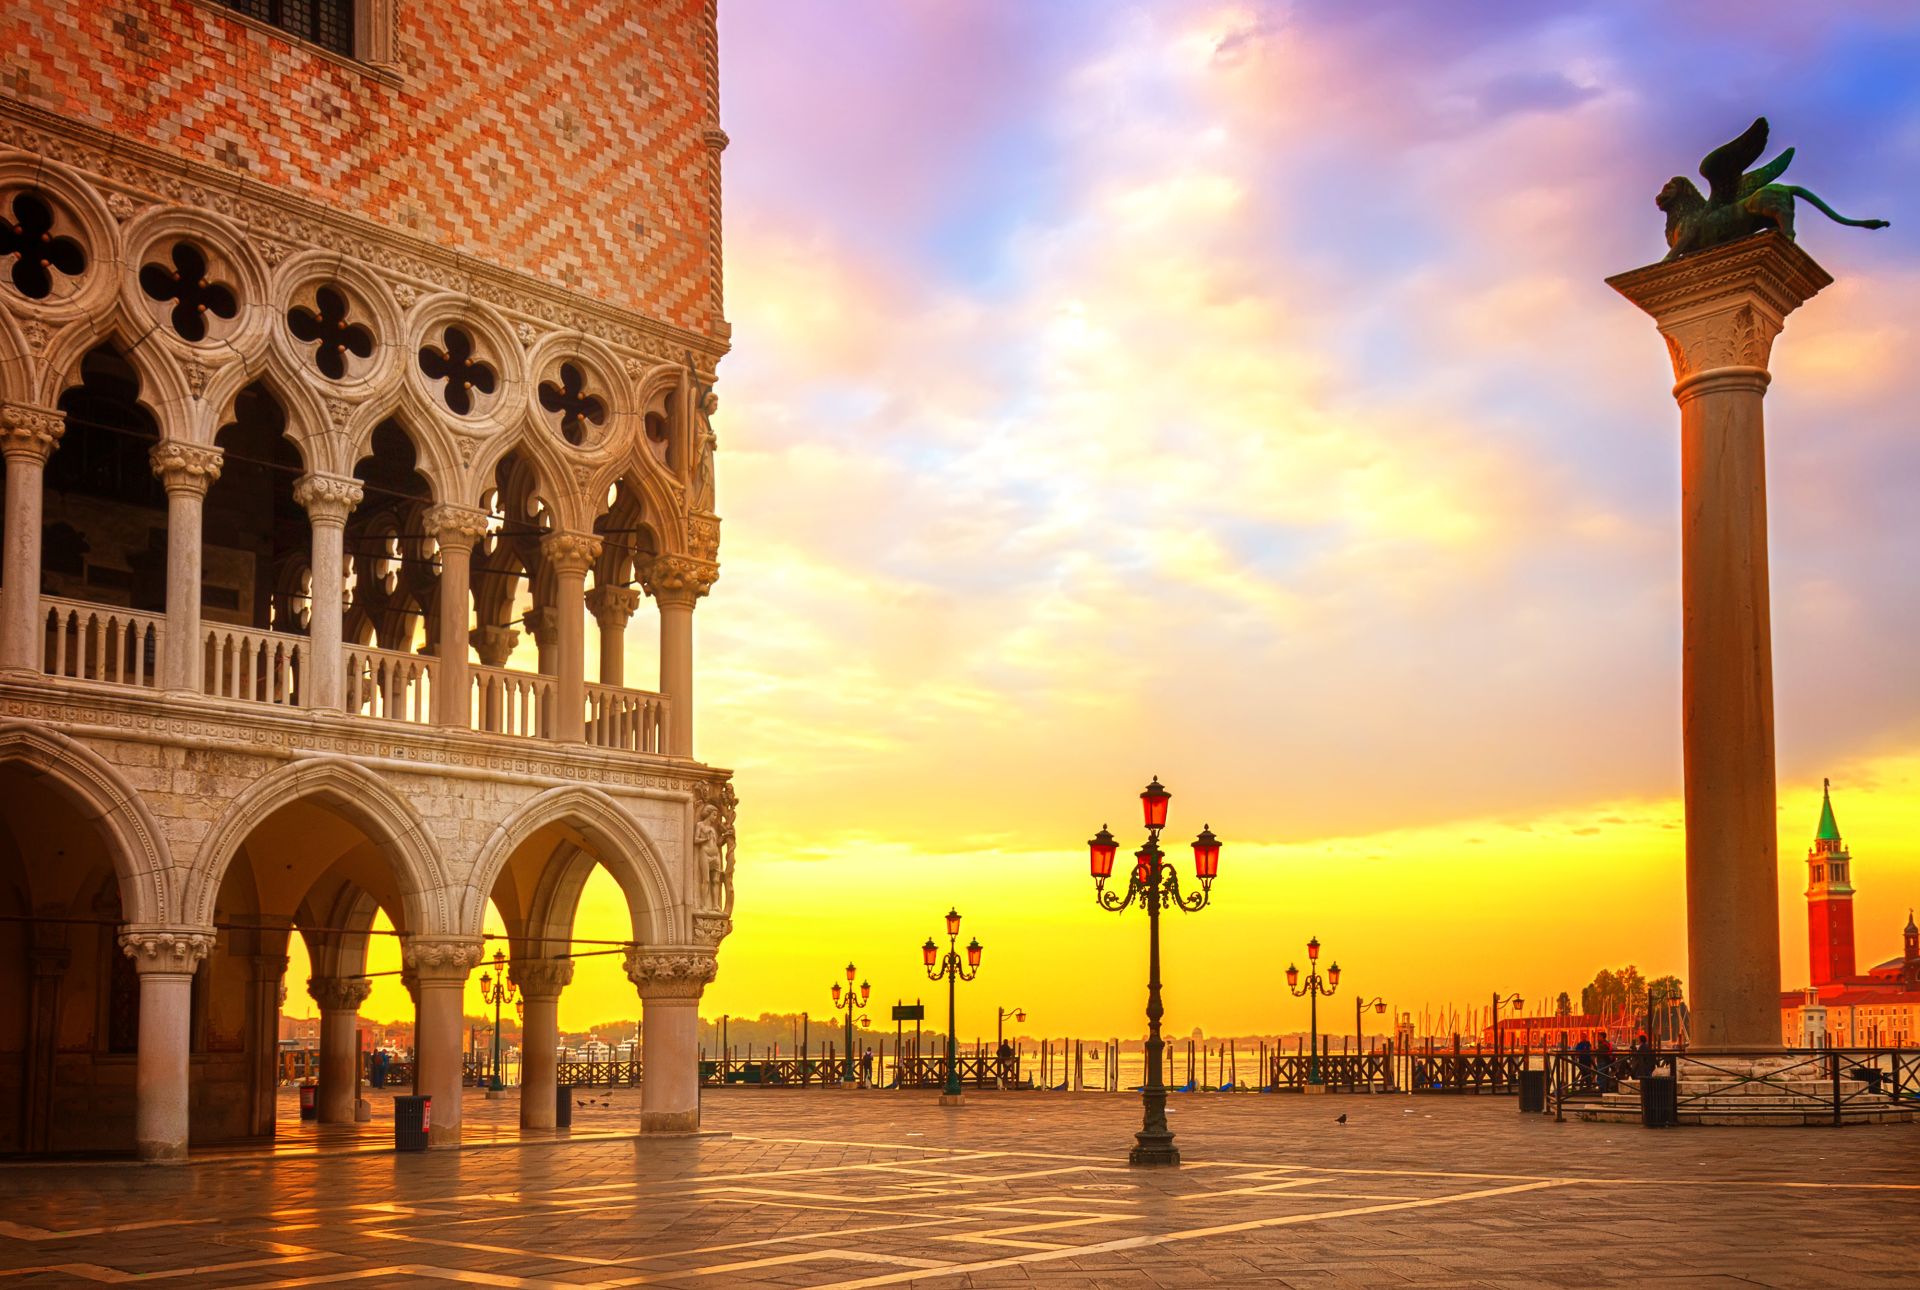 Palazzo-Ducale-Doges-Palace-in-Venice-Italy